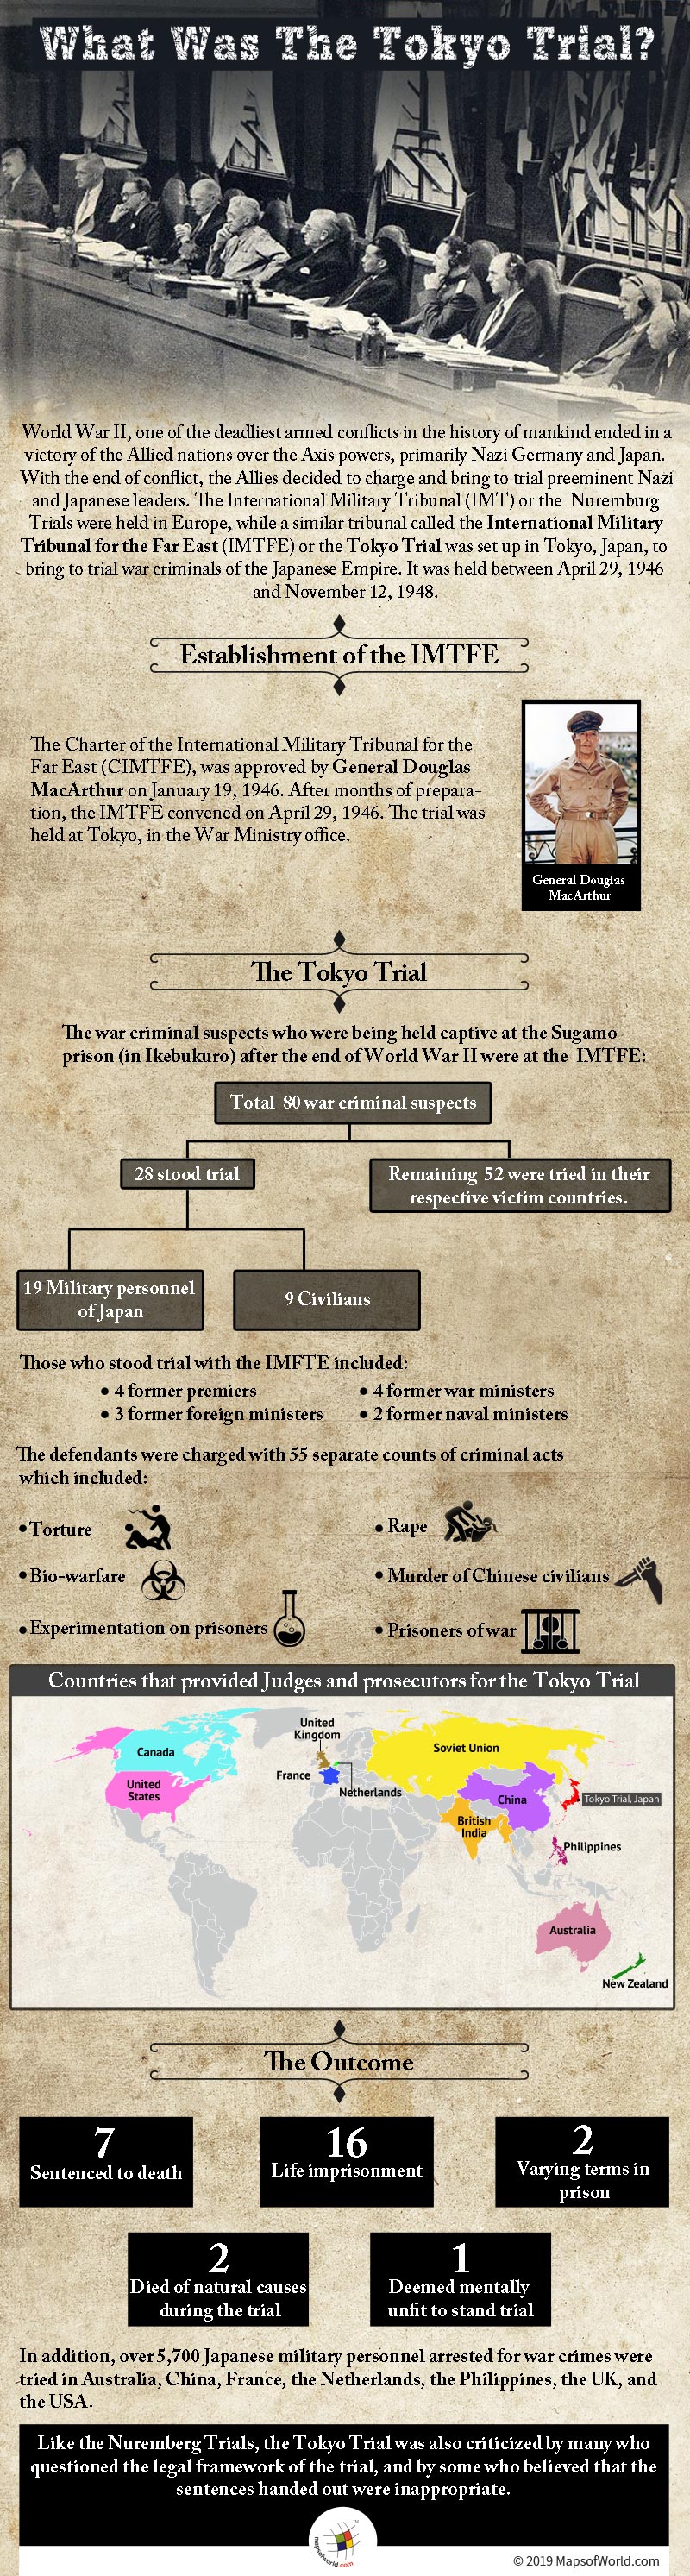 Infographic Giving Details on The Tokyo Trial